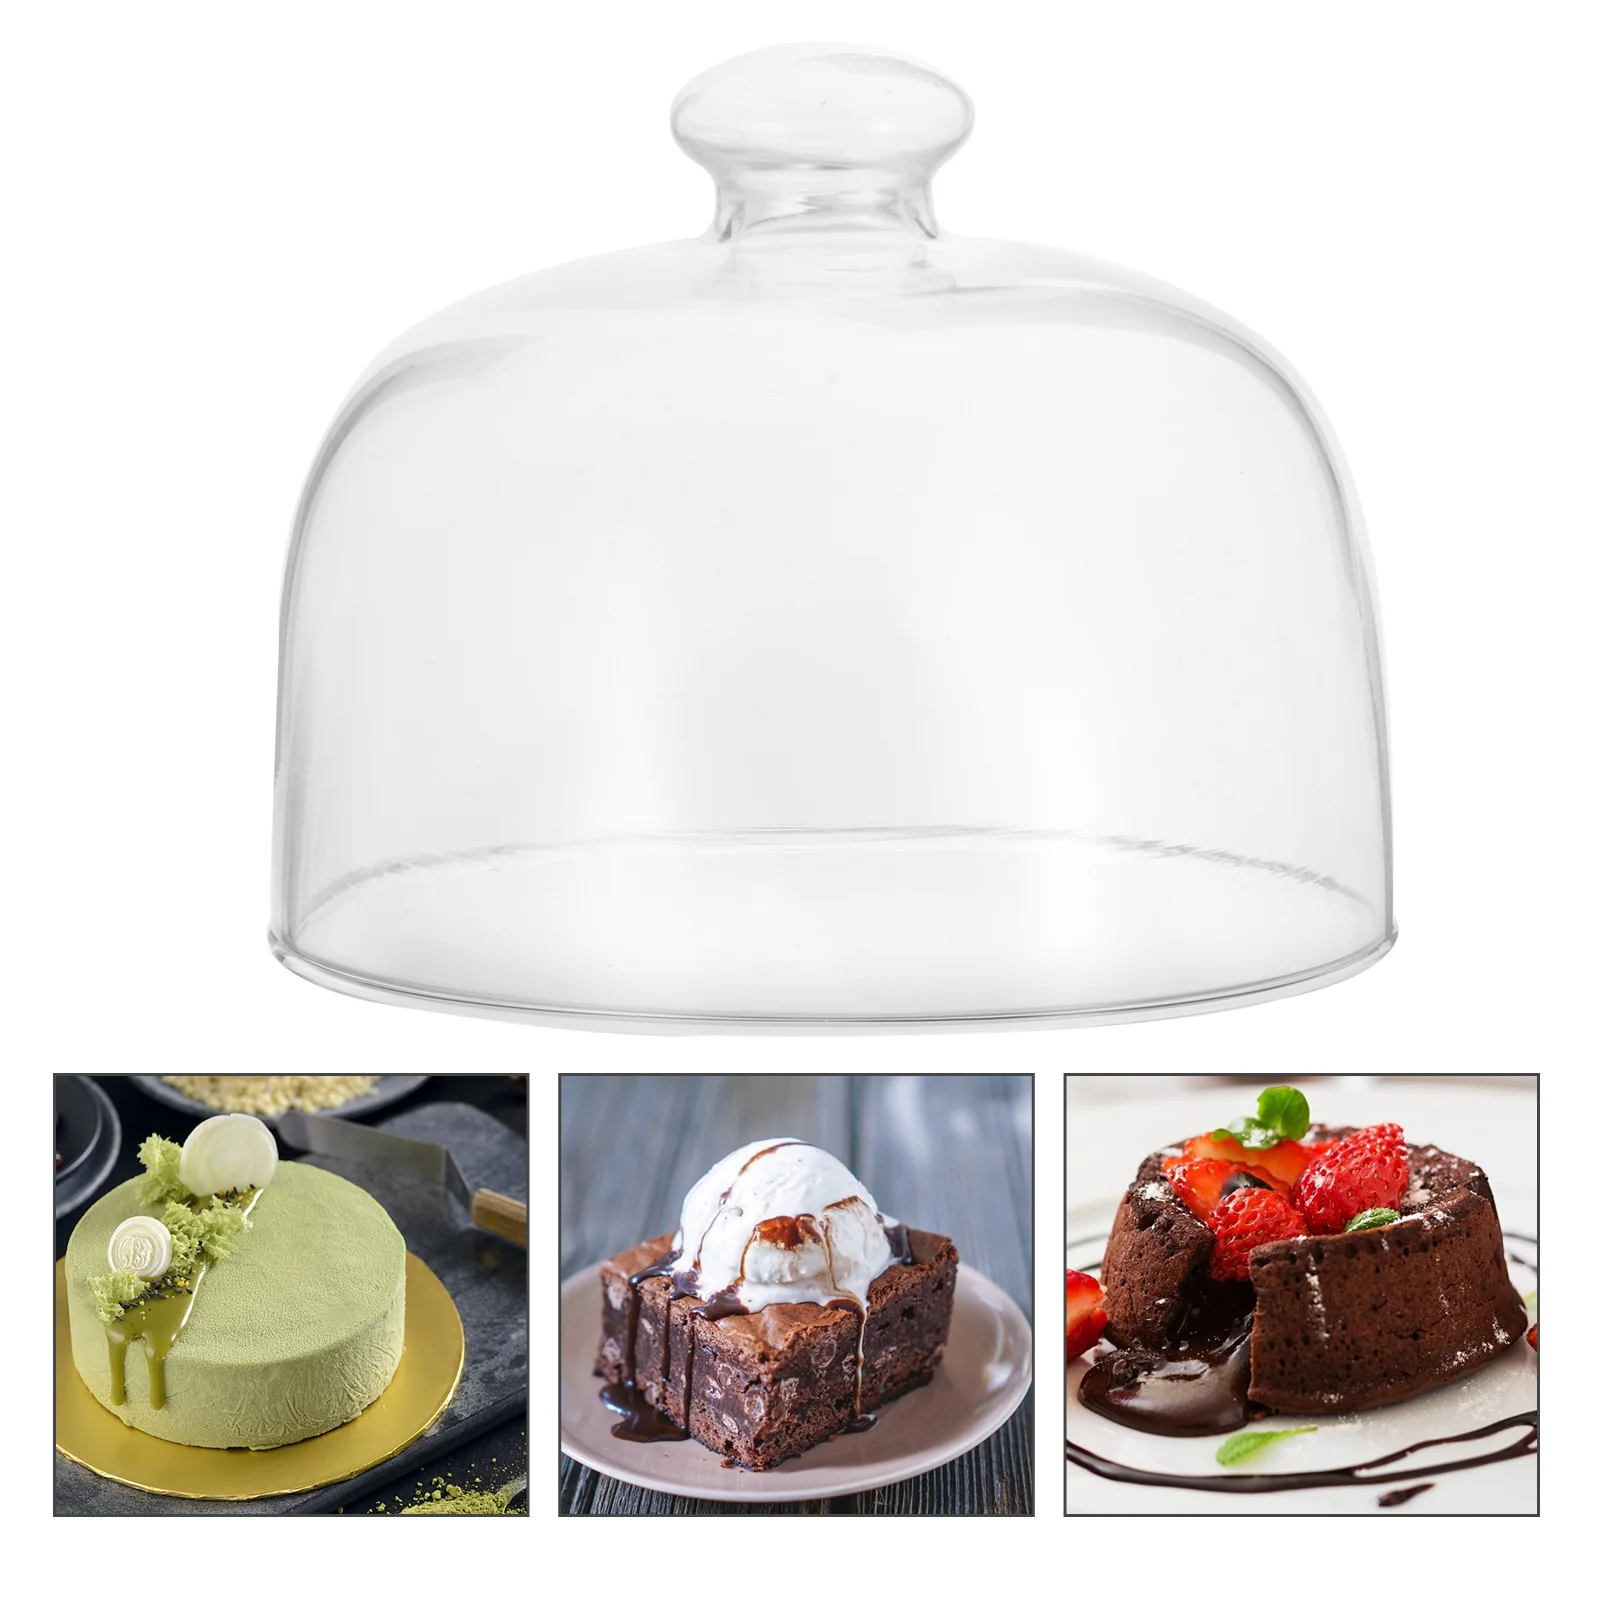 

Cover Dome Cake Food Display Dessert Cloche Platter Stand Serving Plate Lid Microwave Bell Cheese Pastry Server Acrylic Clear